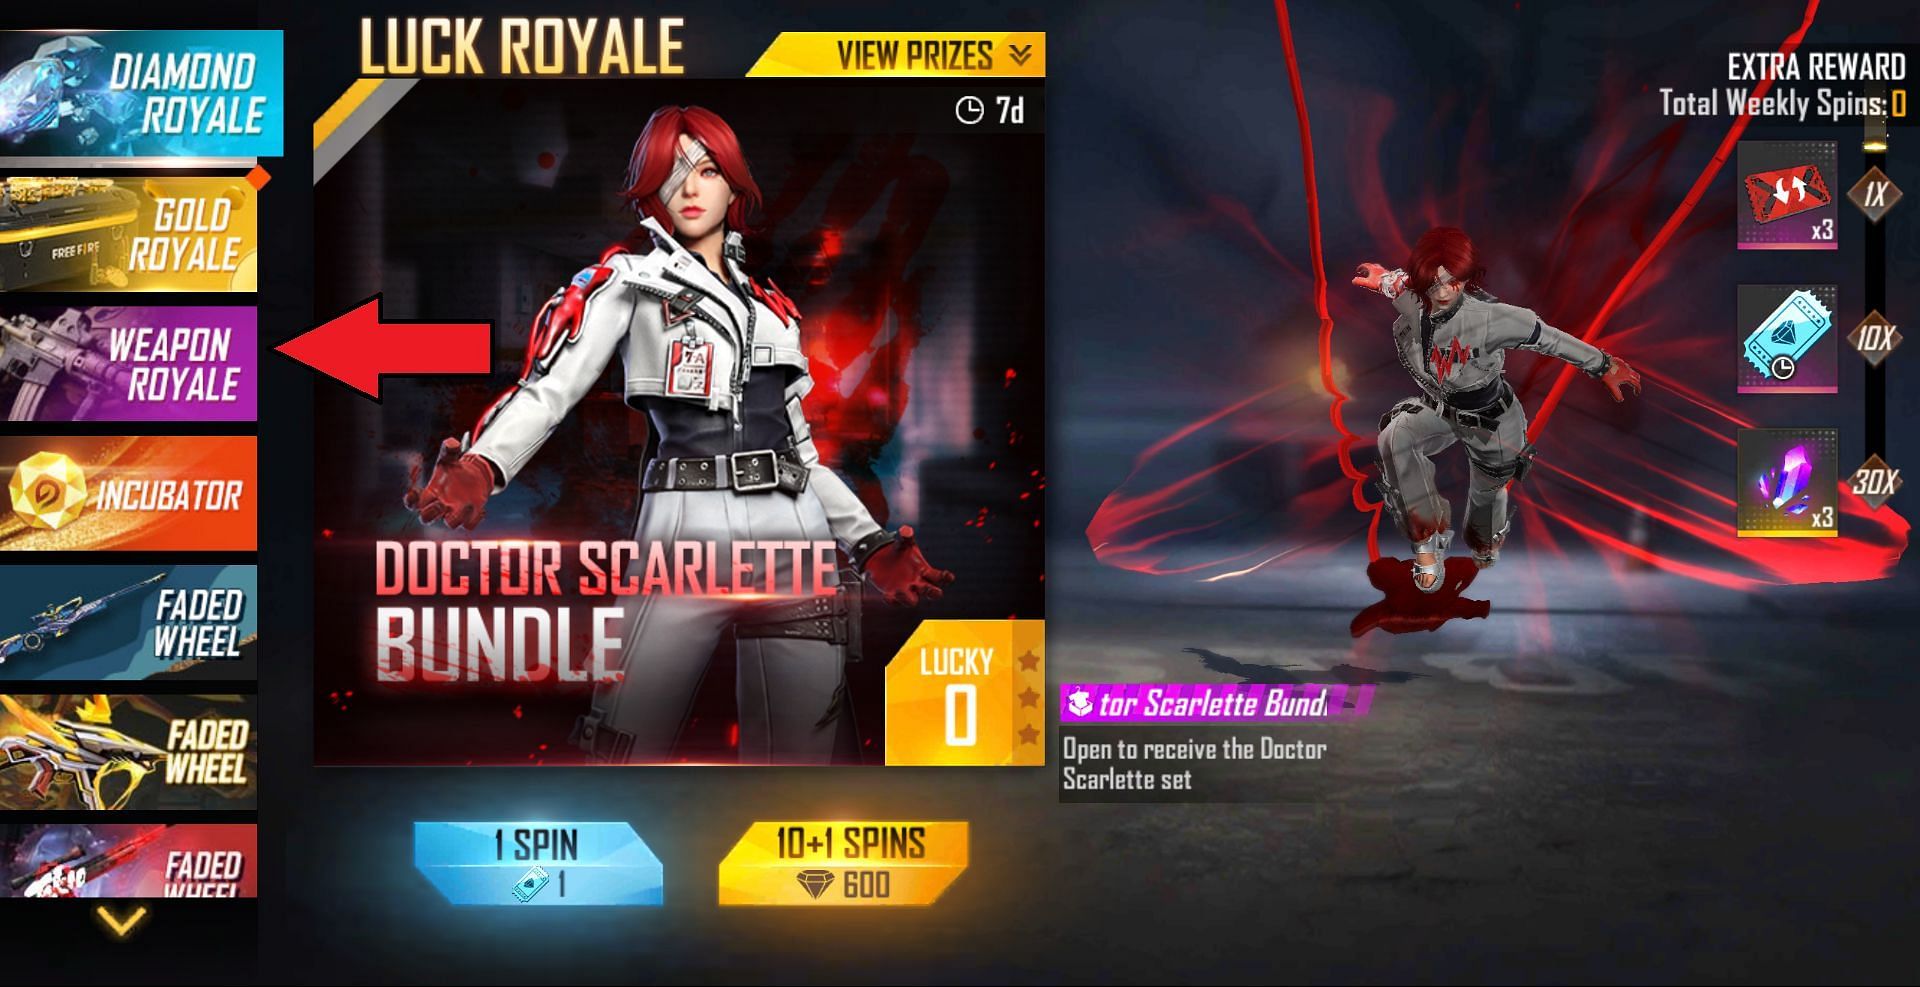 Gamers next need to press here to access Weapon Royale (Image via Free Fire)